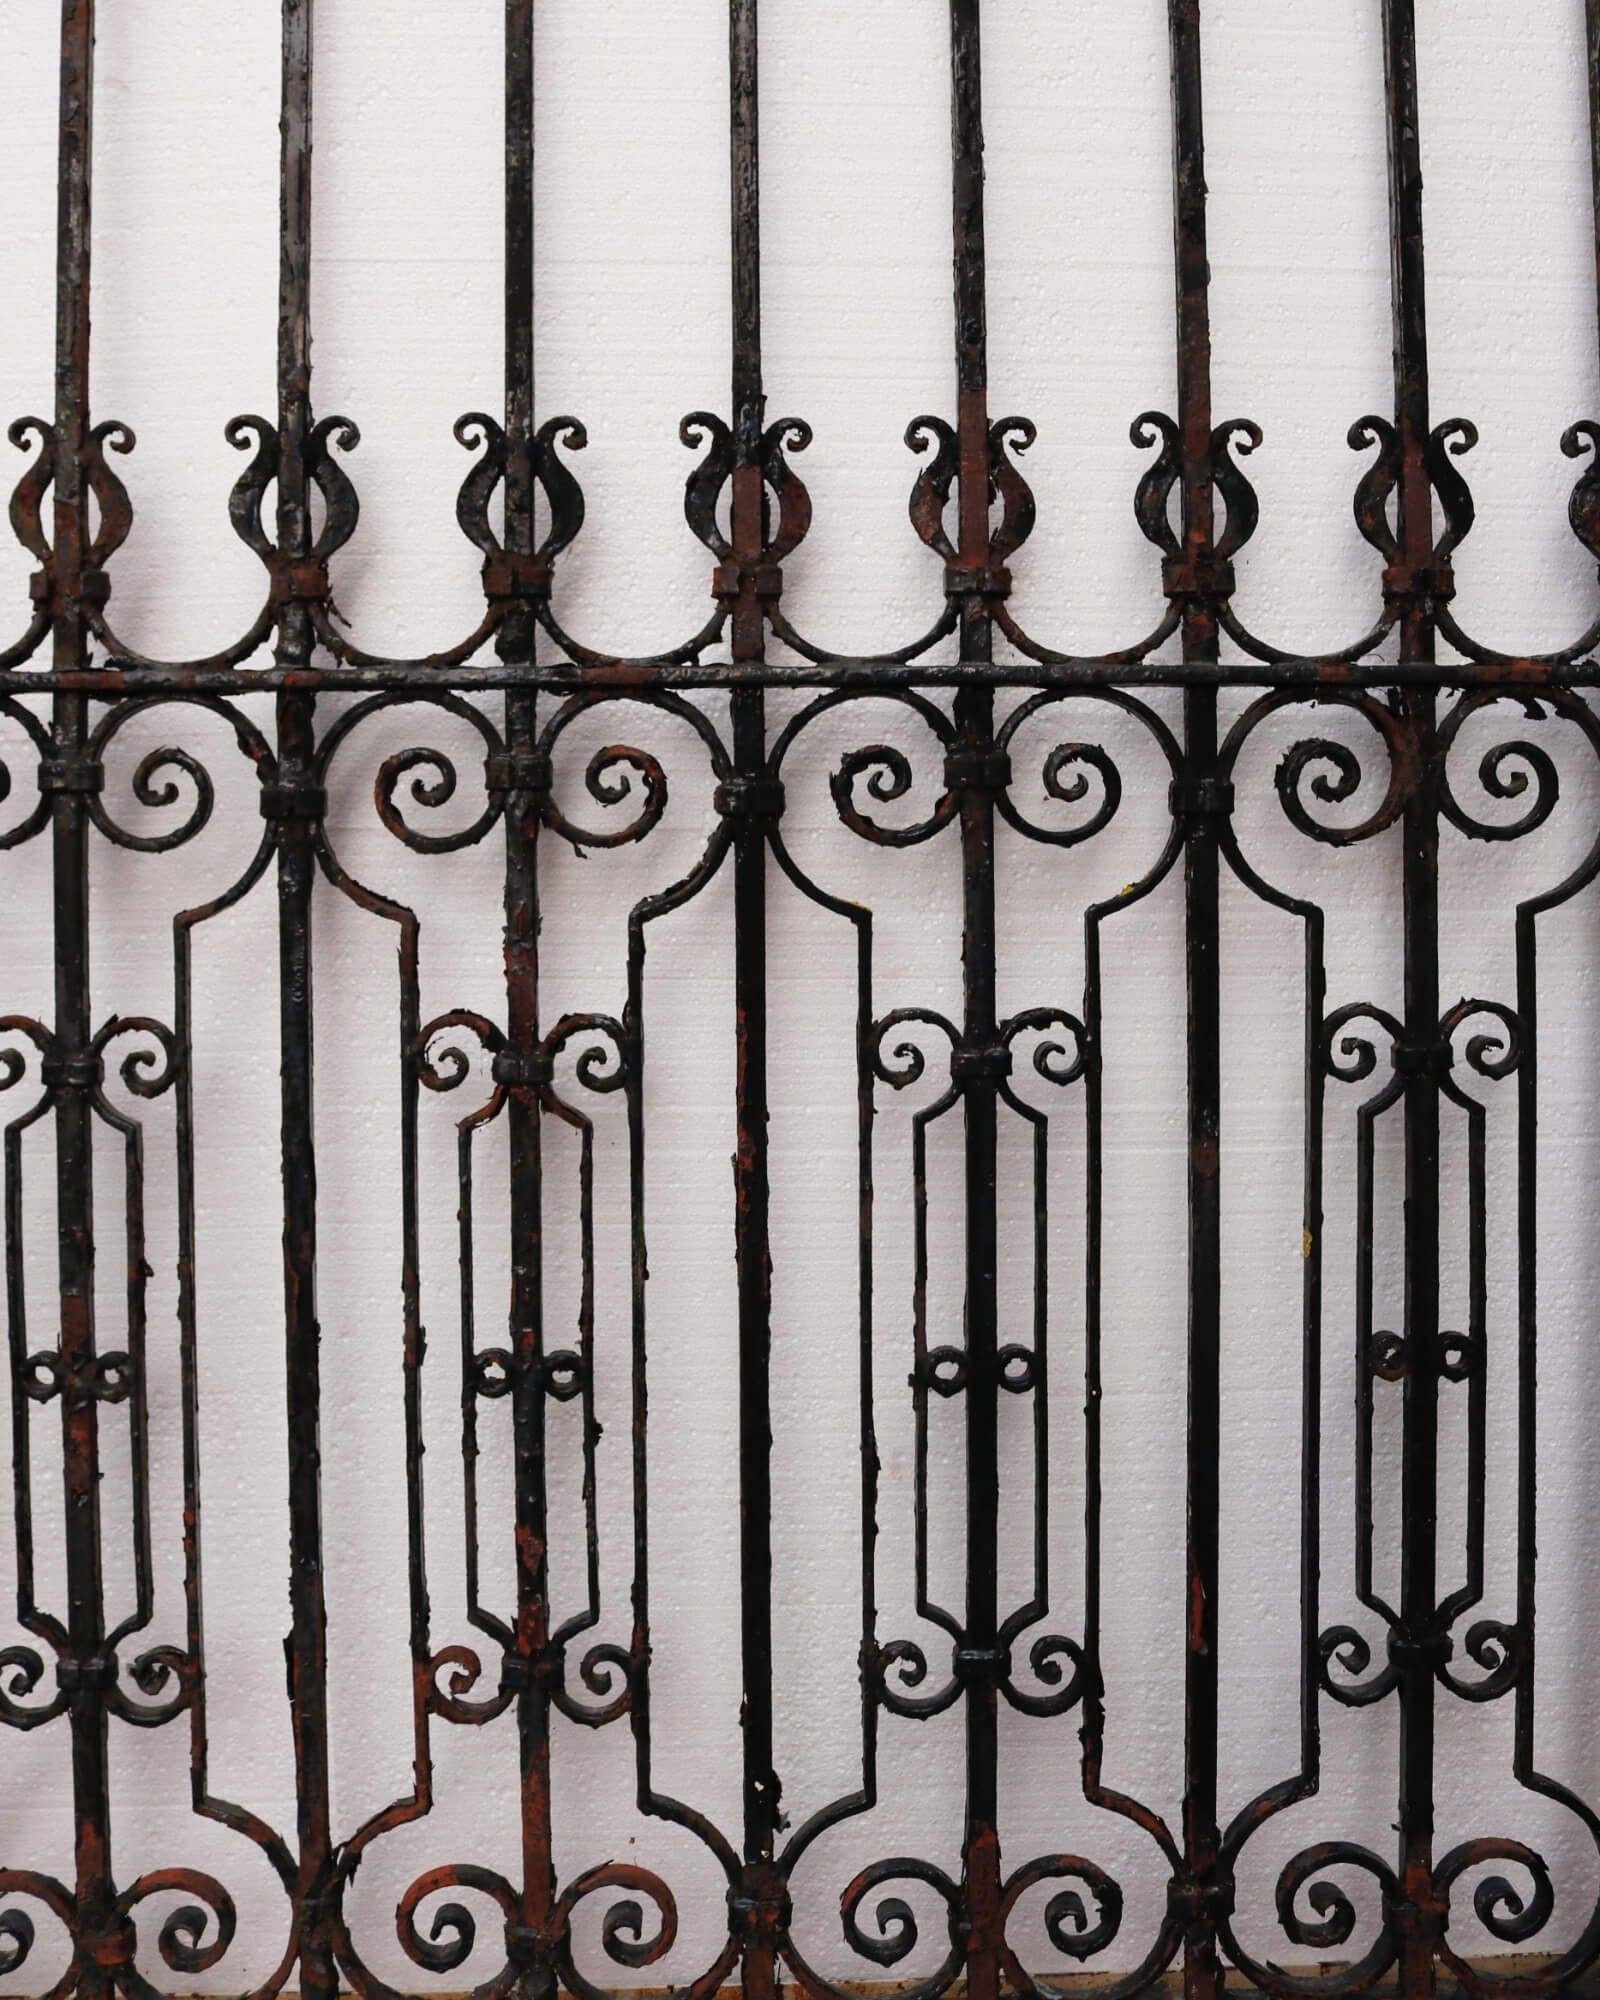 Pair of Victorian Wrought Iron Driveway Gates In Fair Condition For Sale In Wormelow, Herefordshire